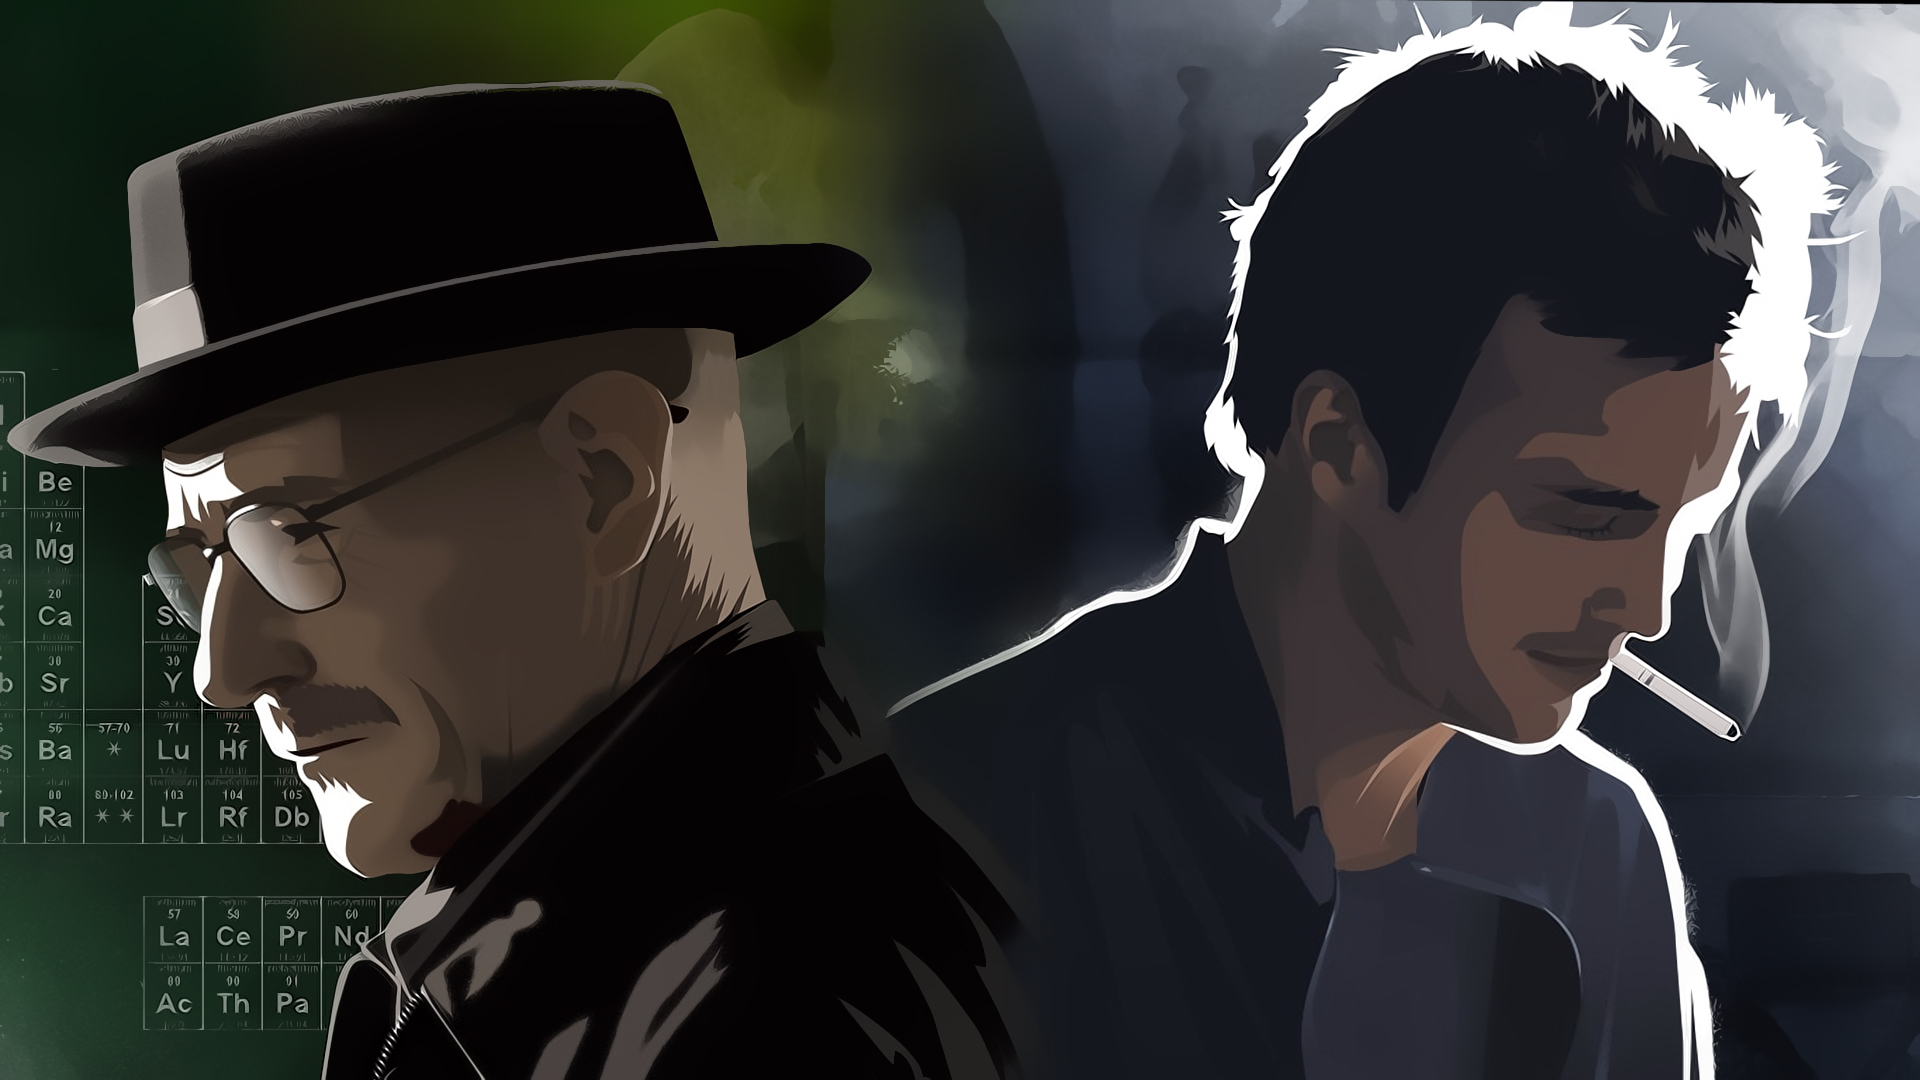 Breaking Bad Backgrounds, Pictures, Images